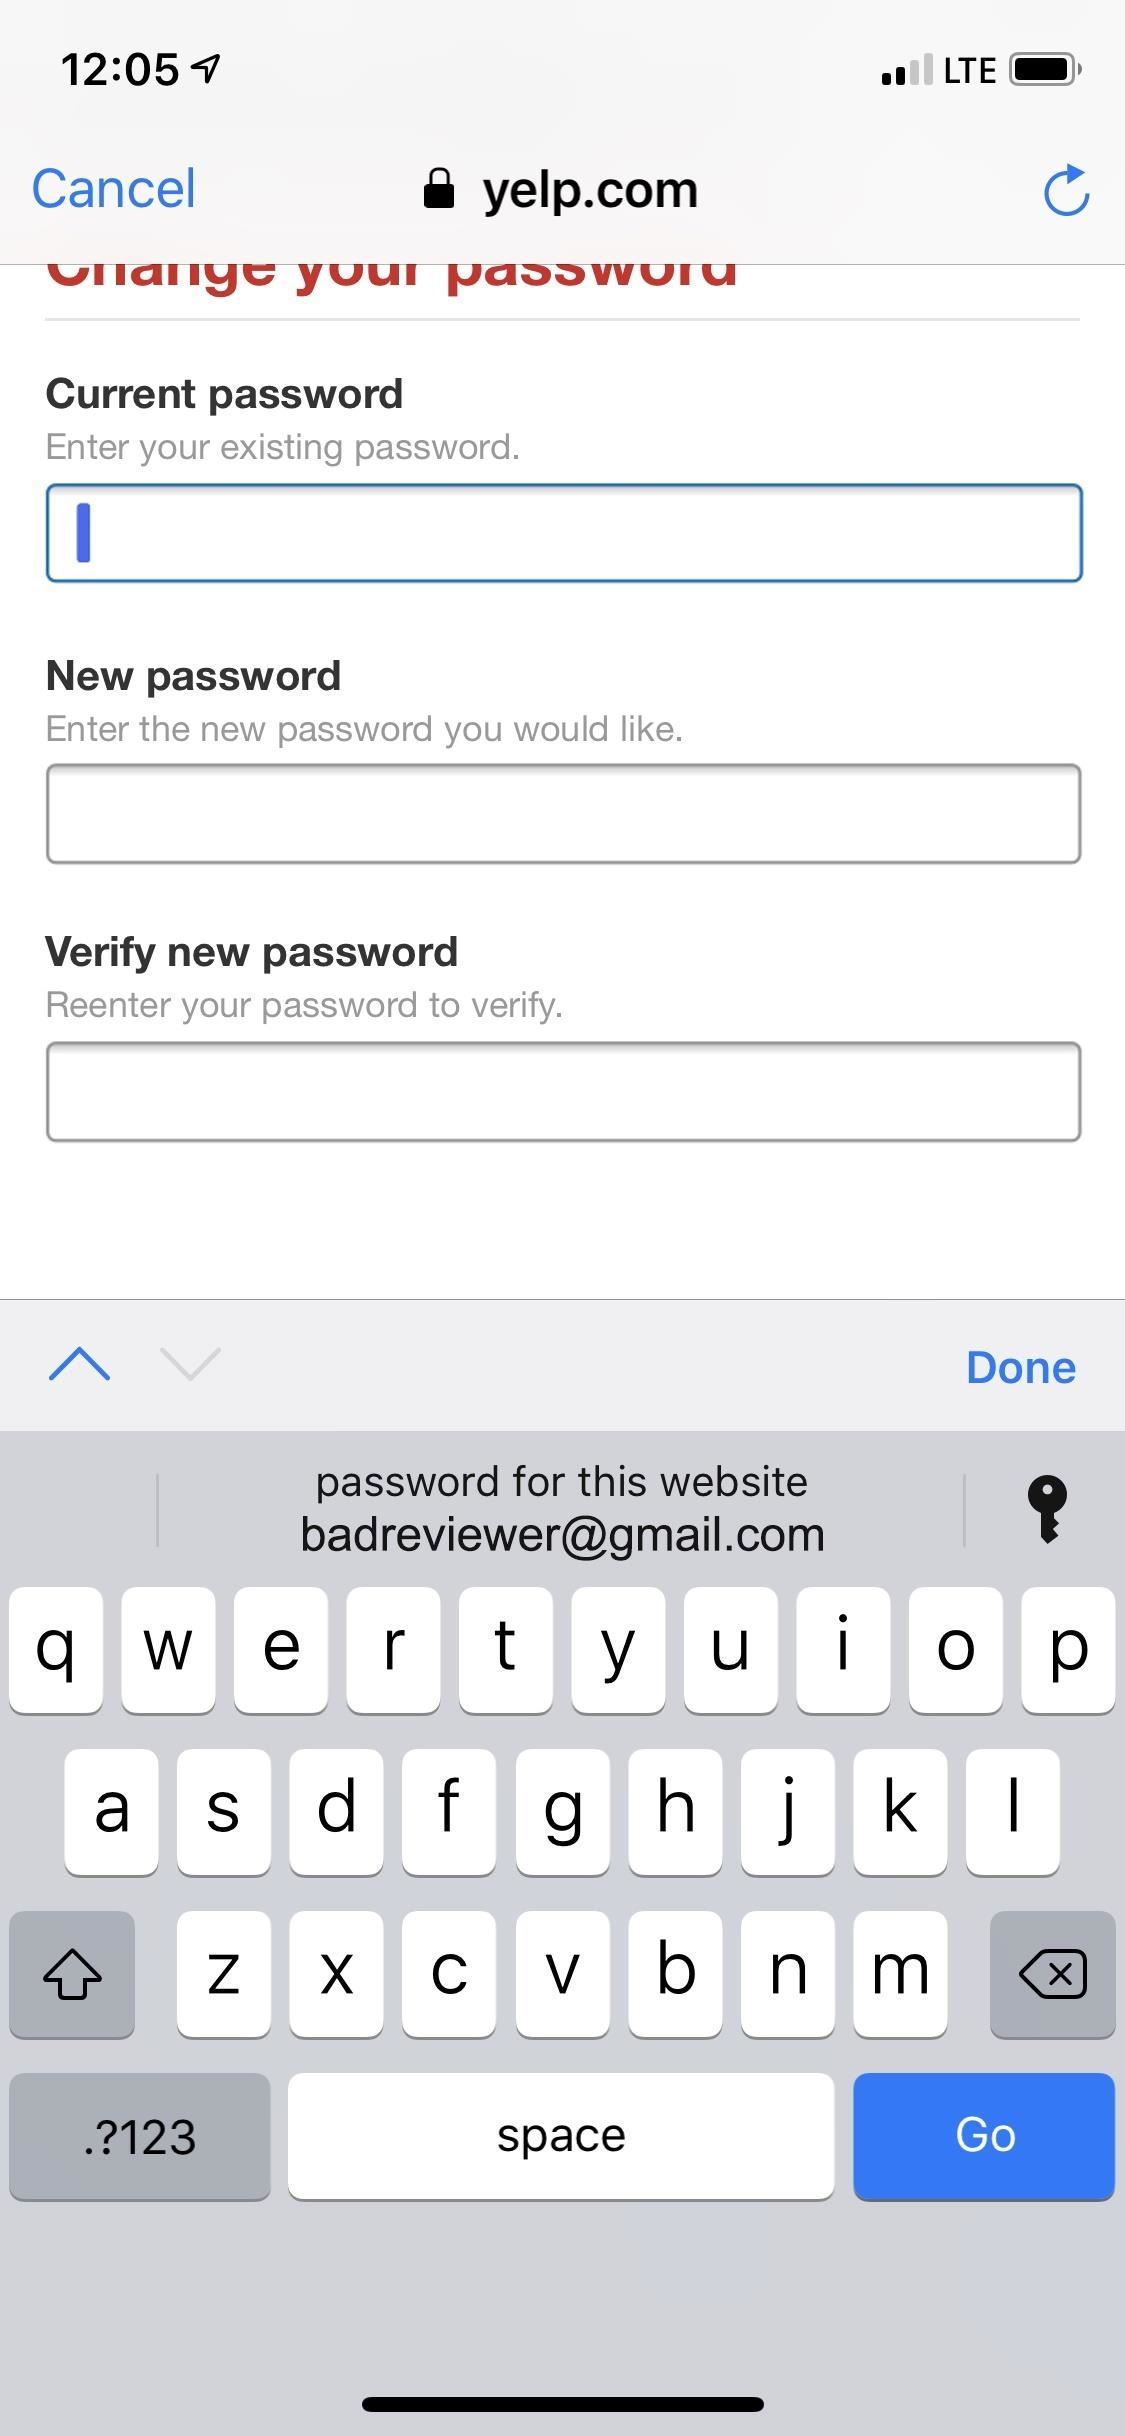 How to Find & Change Weak Reused Passwords to Stronger Ones More Easily in iOS 12